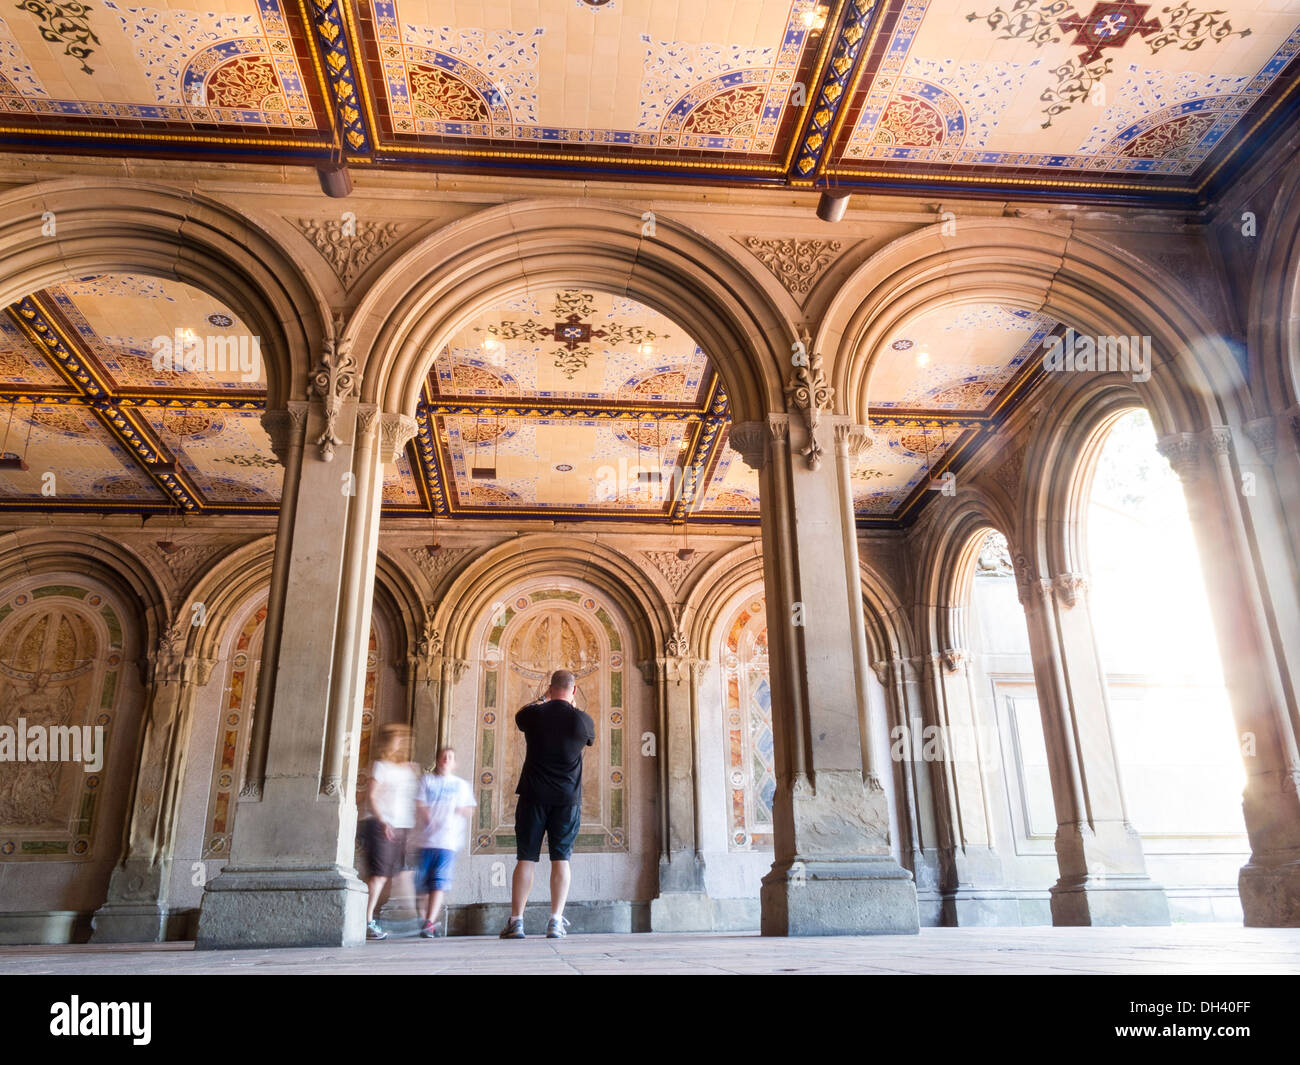 Bethesda Terrace Arcade, an architectural marvel in Central Park